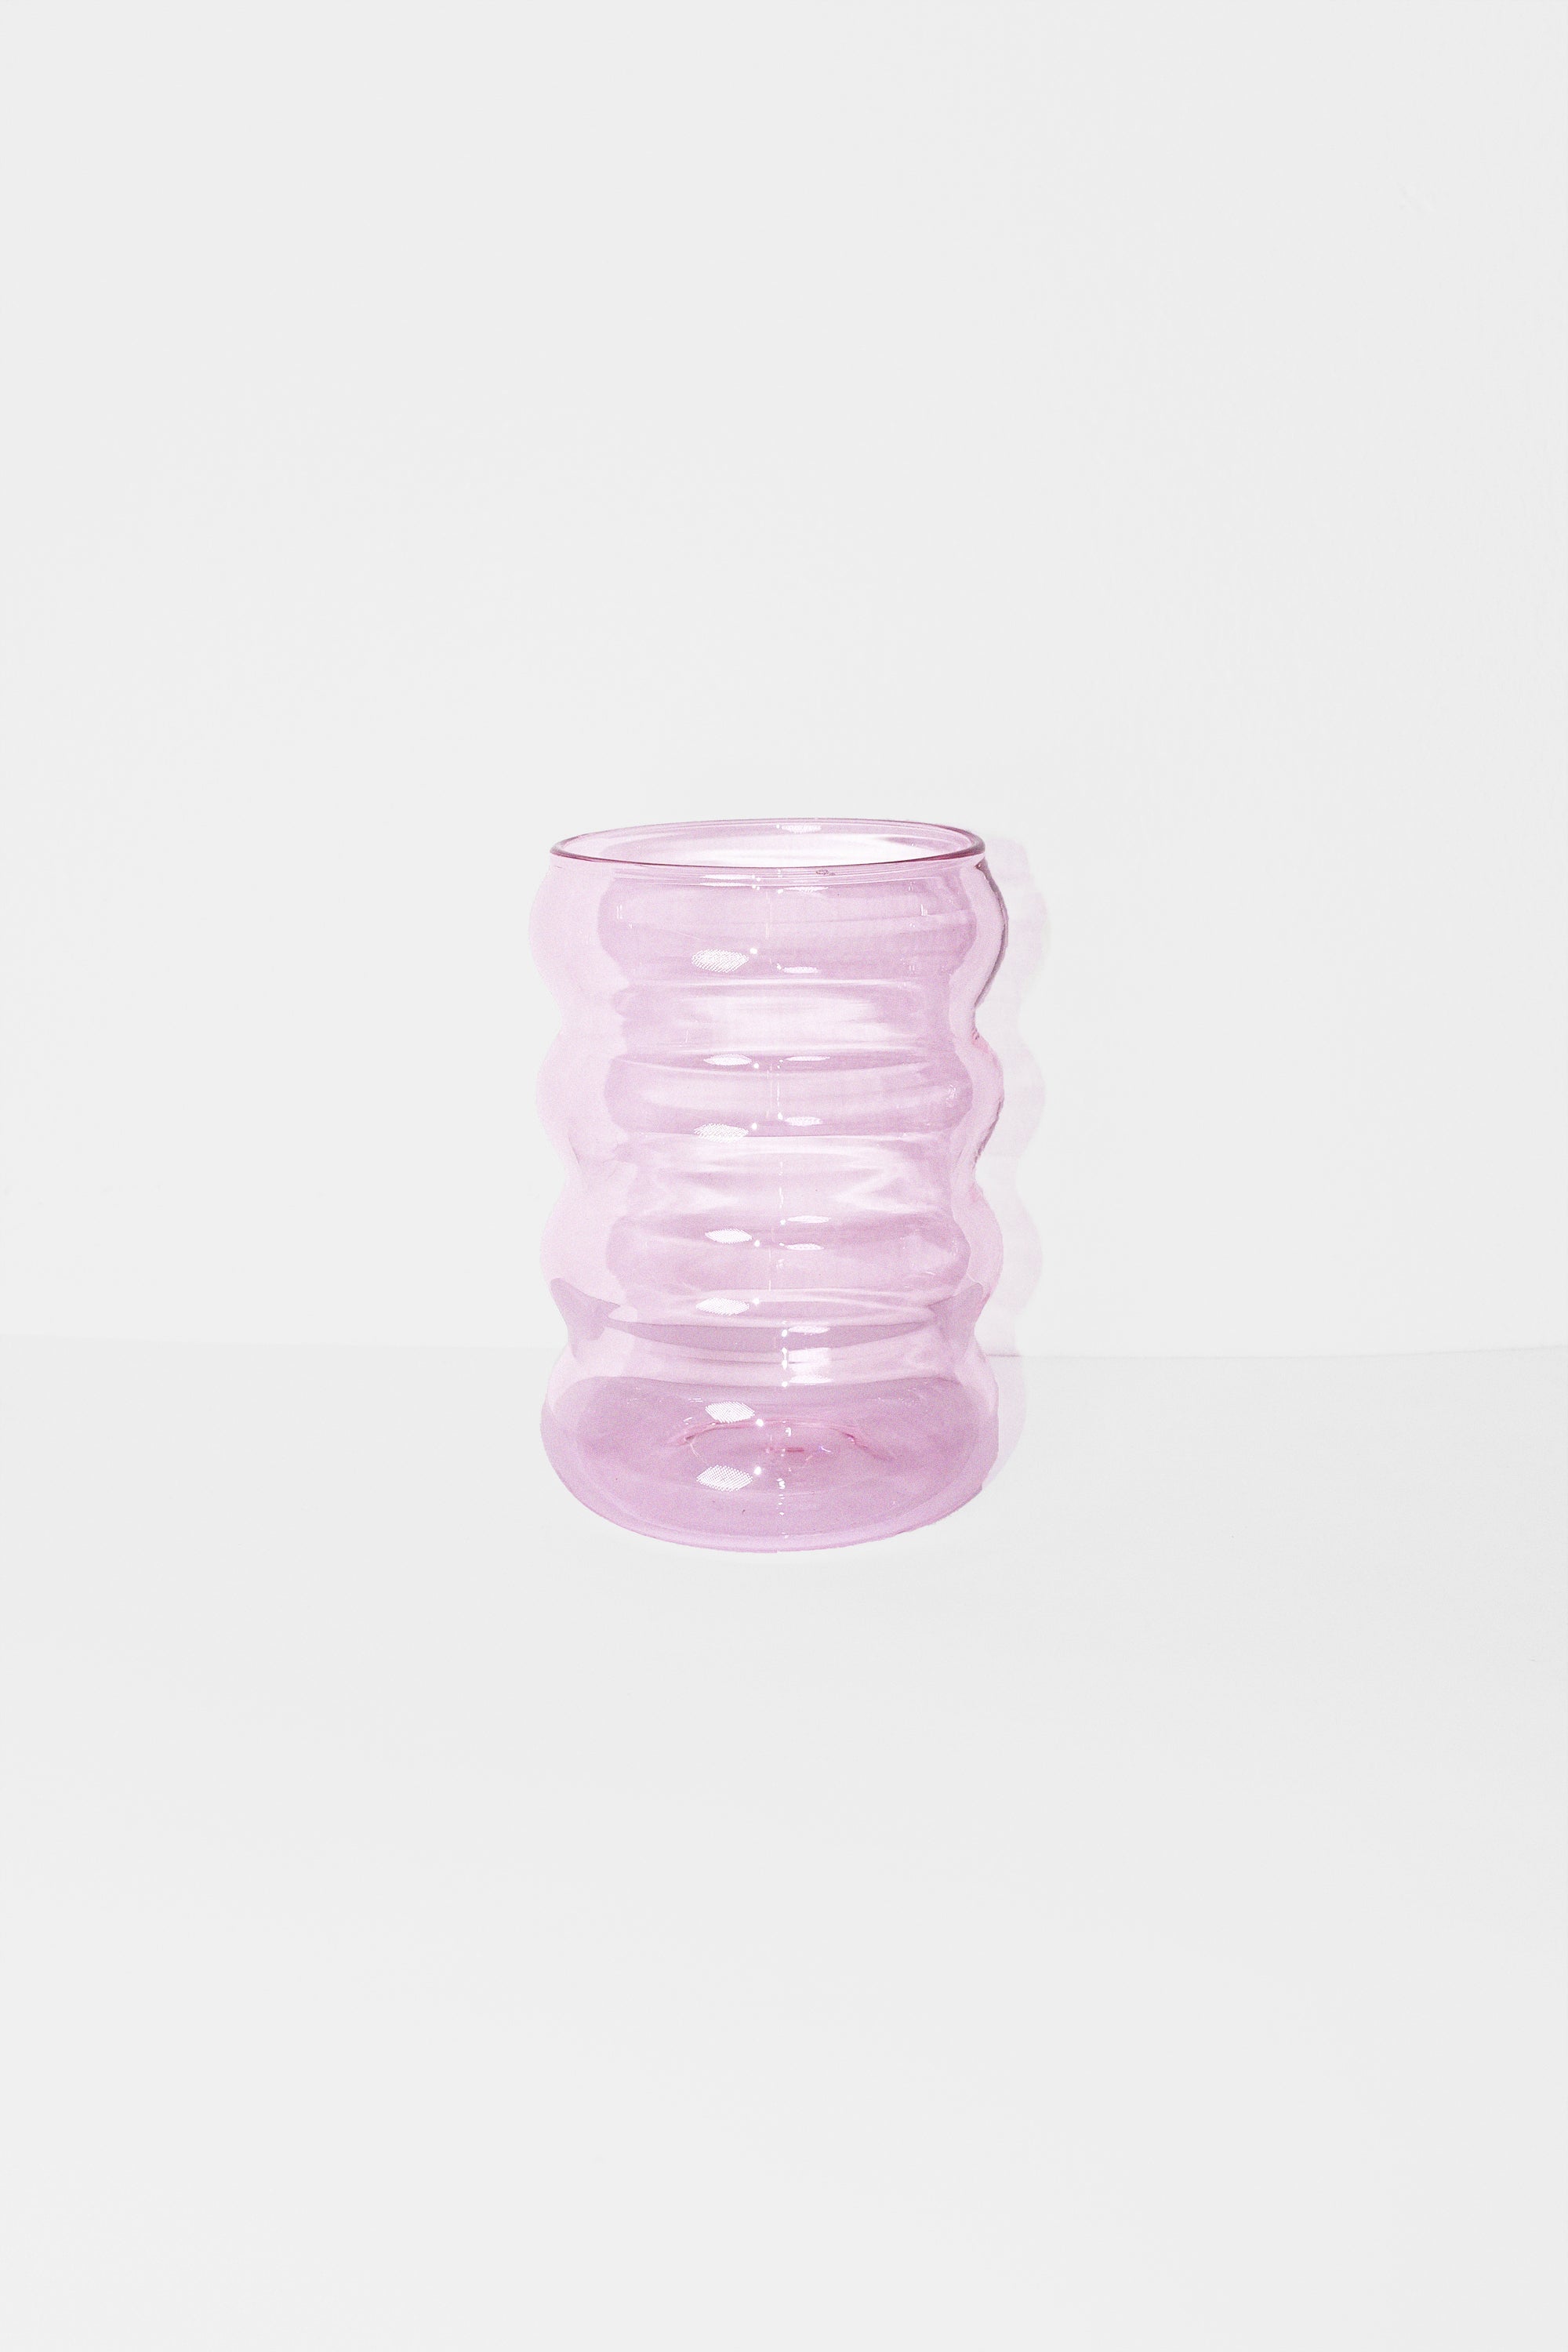 Ripple Cup in 6oz Pink by Sophie Lou Jacobsen